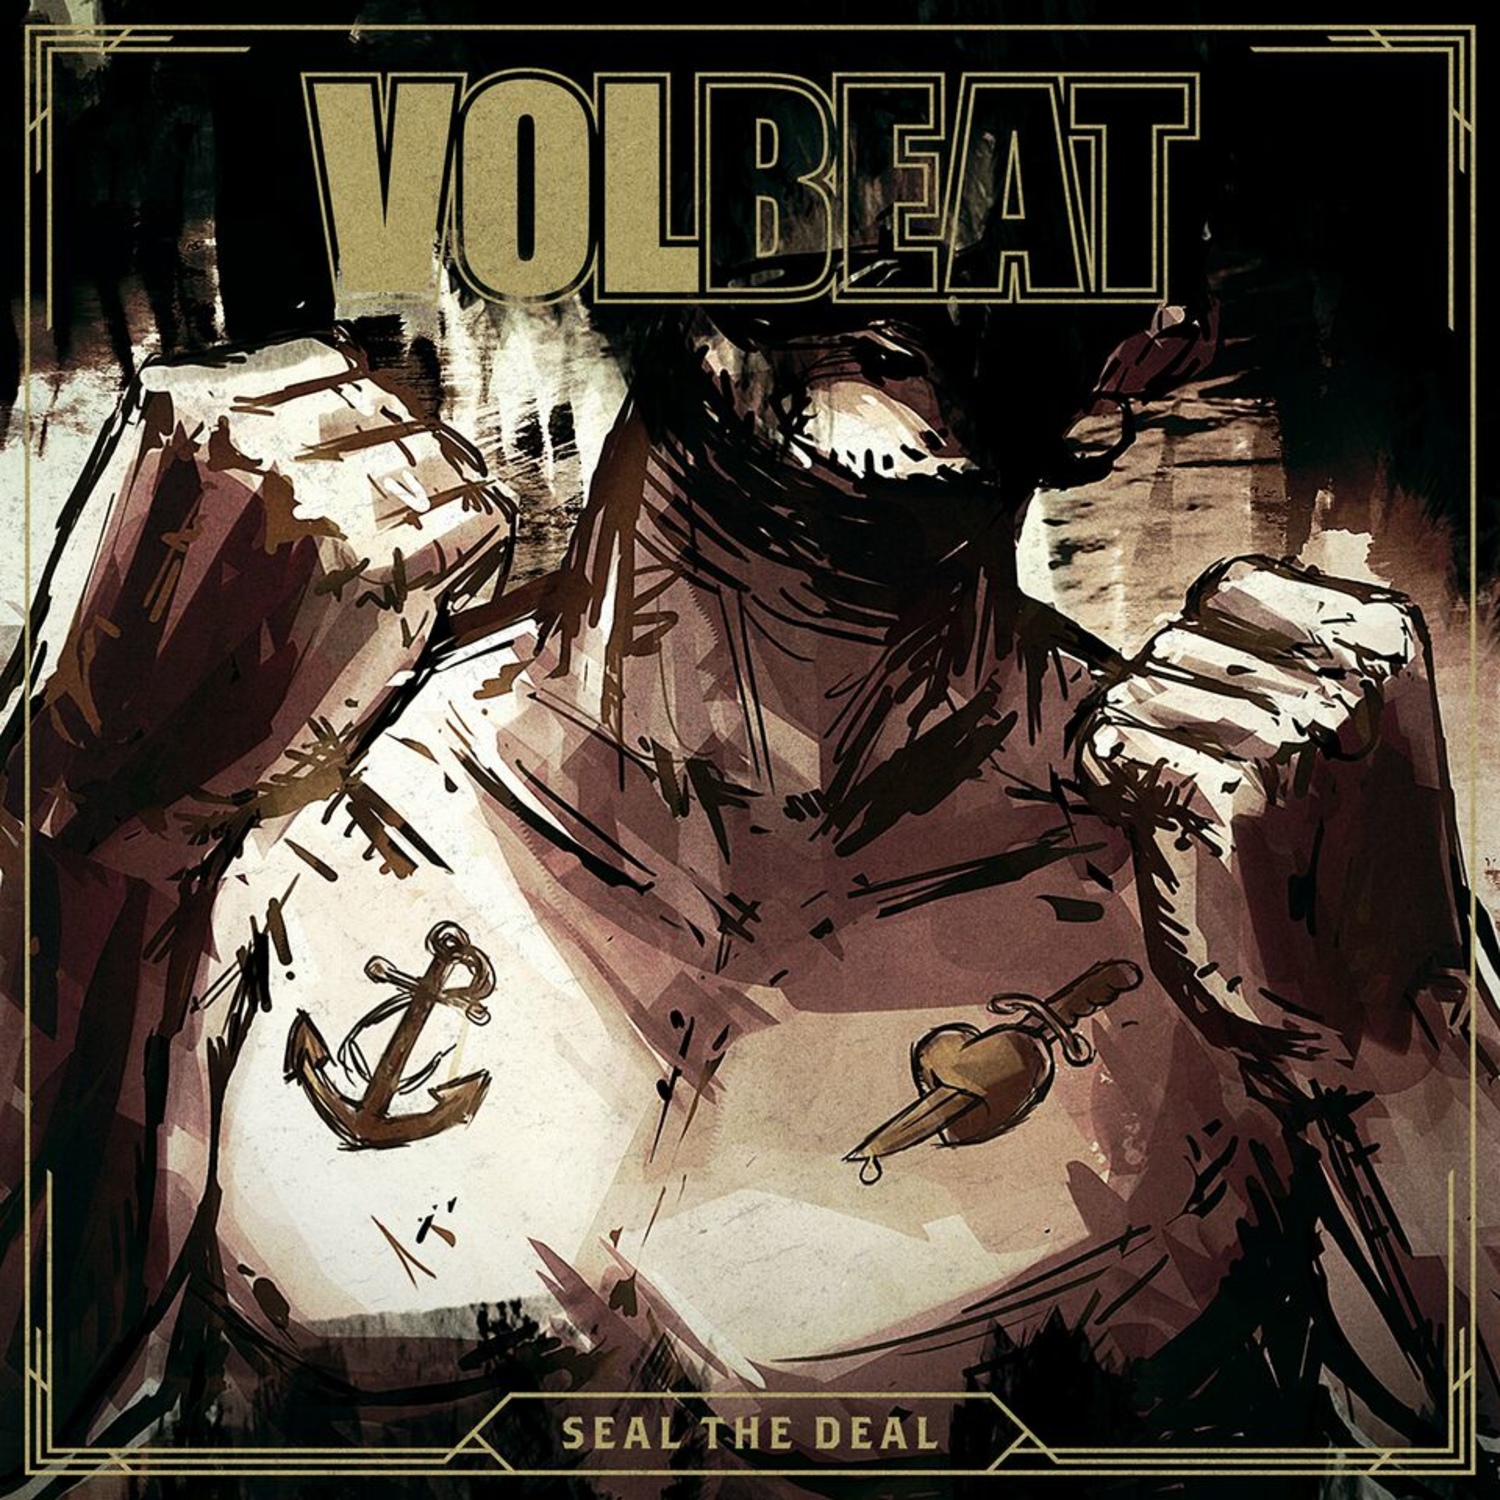 when is the new volbeat album coming out